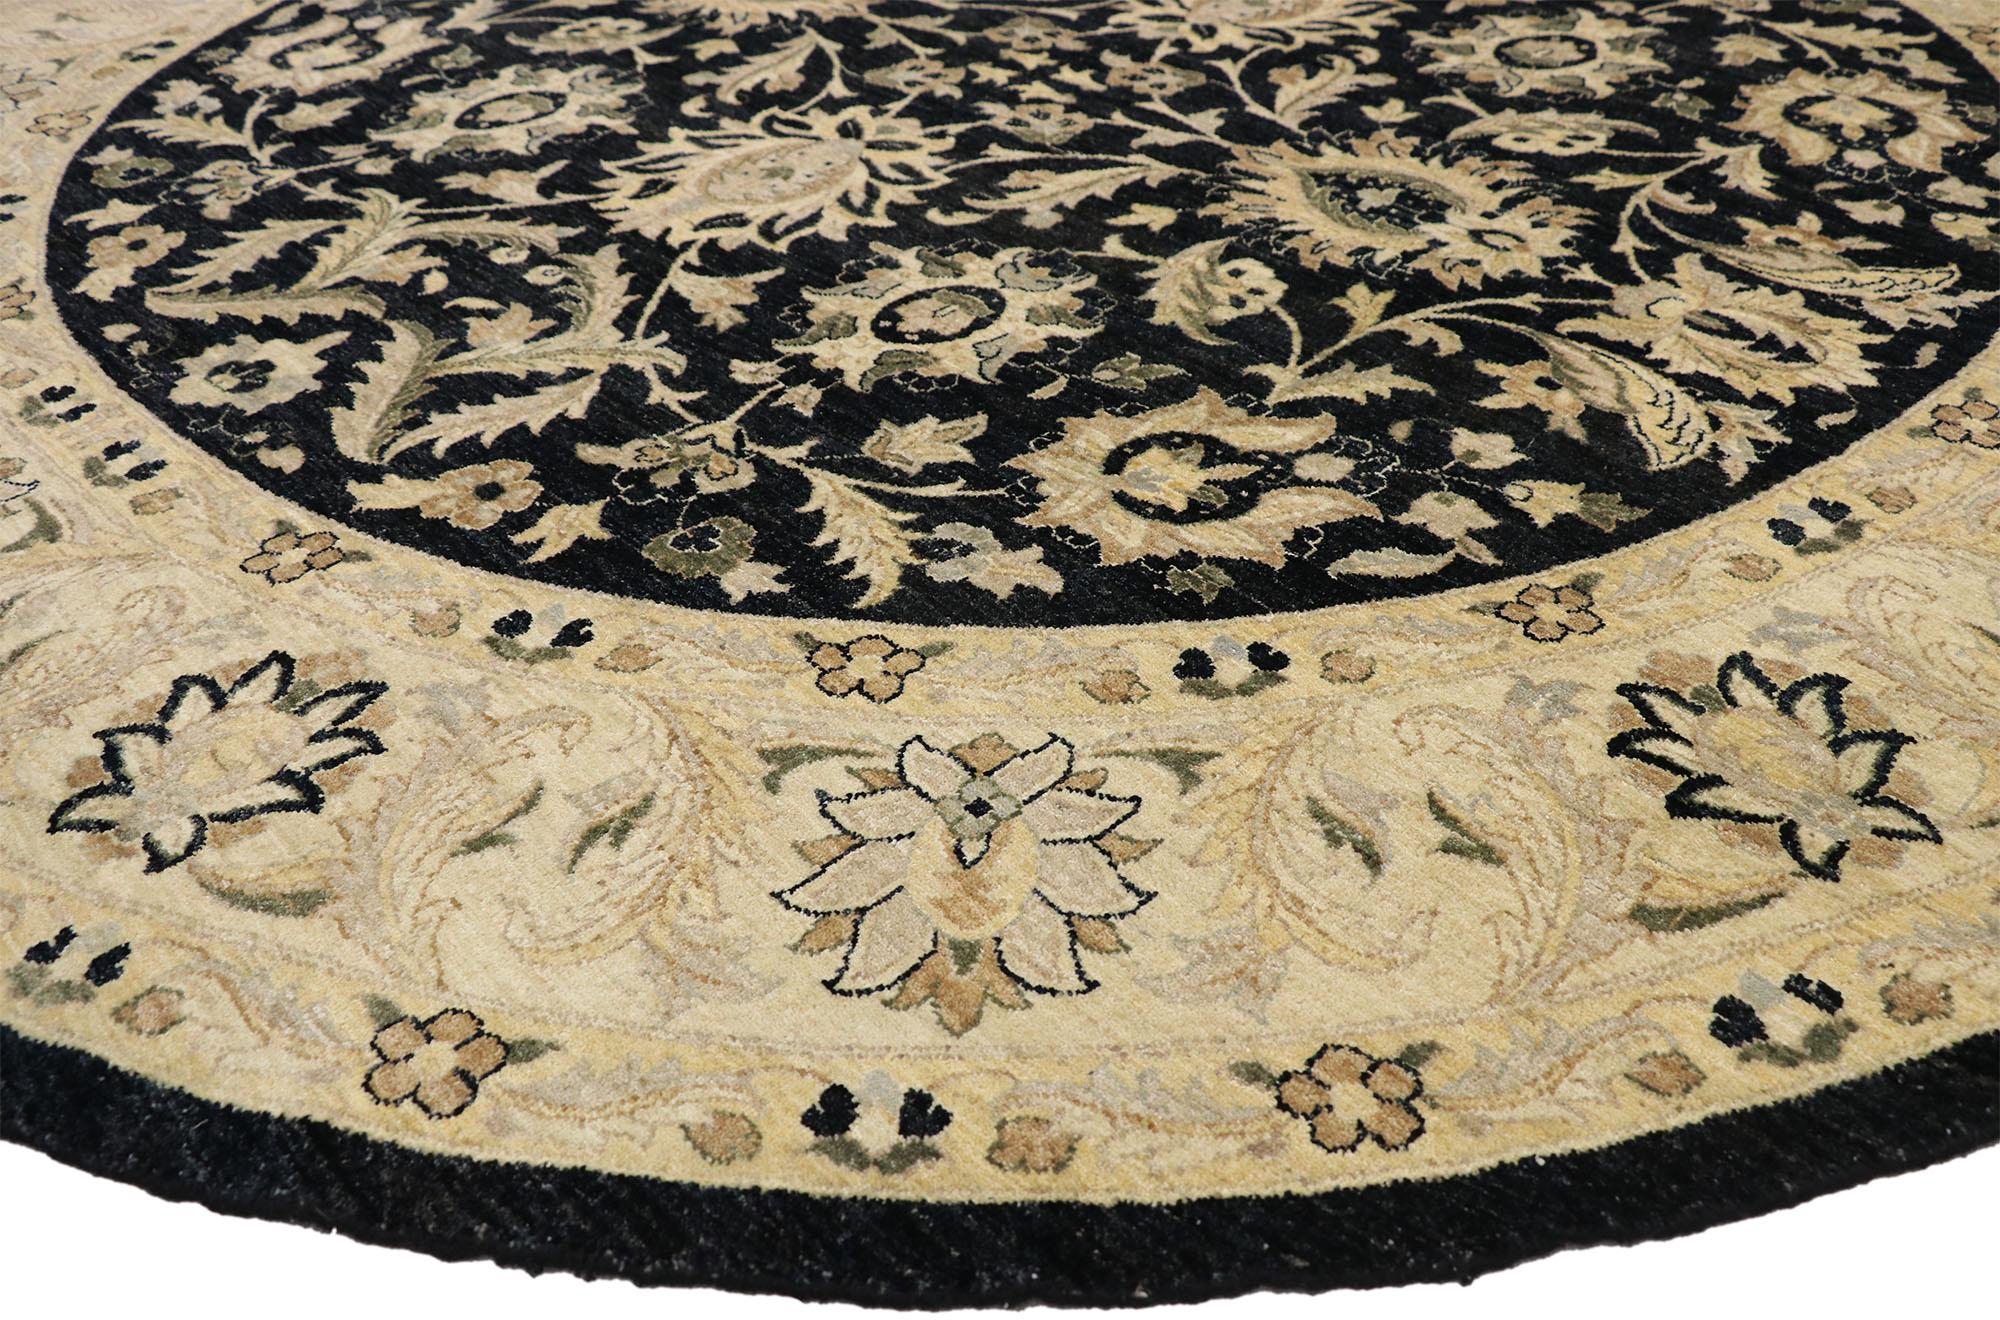 77361 Vintage Indian Round Area Rug, Circular Rug with Modern Amish Style. This vintage hand knotted wool Indian round area rug features an all-over floral pattern spread across an abrashed black field. Large harshang palmettes, serrated leaves,